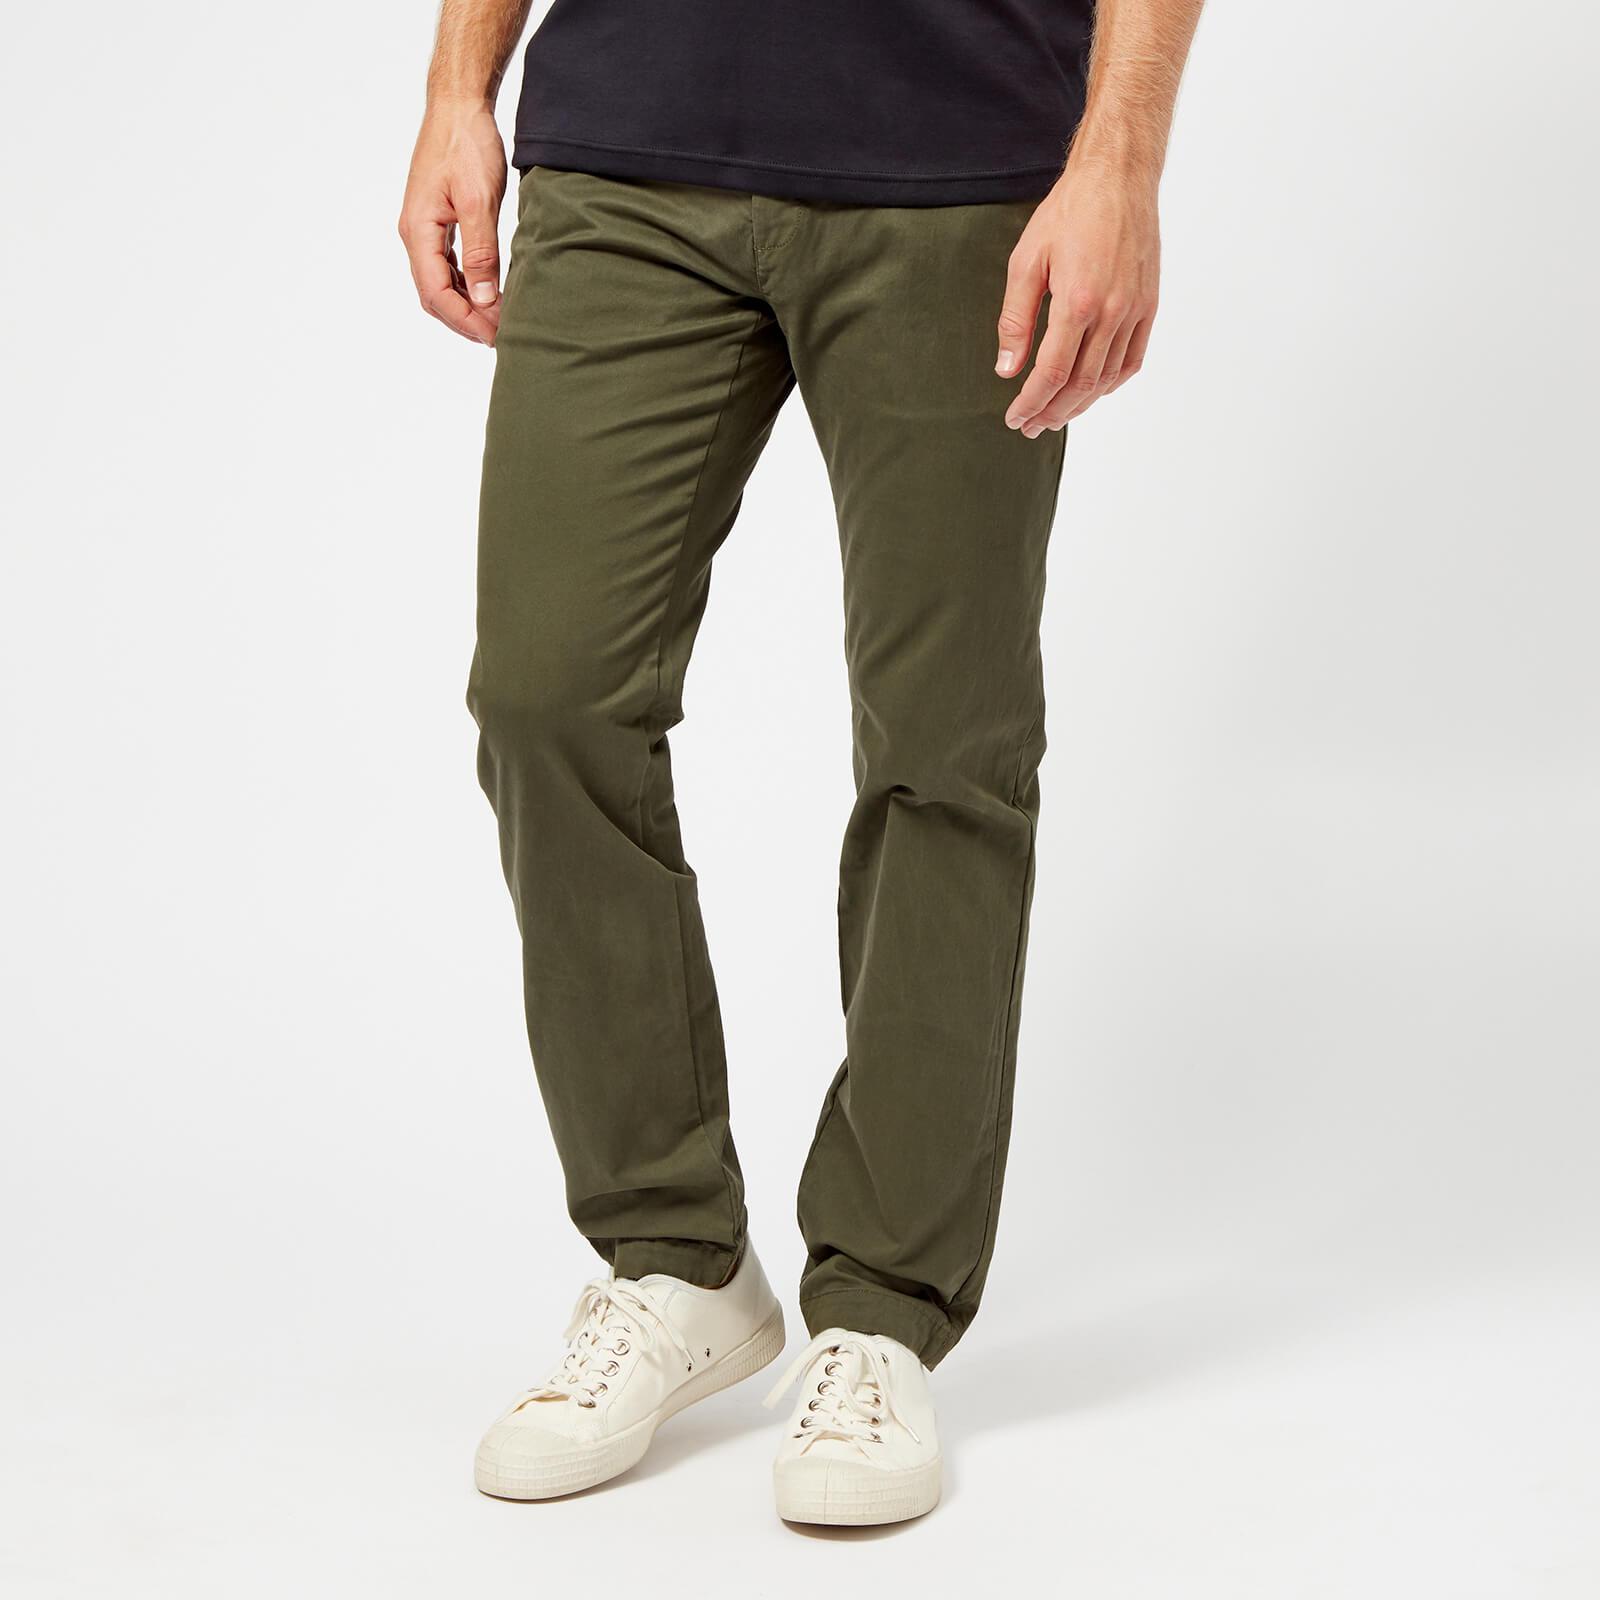 Ted Baker Seleb Slim Fit Chinos in Green for Men - Lyst